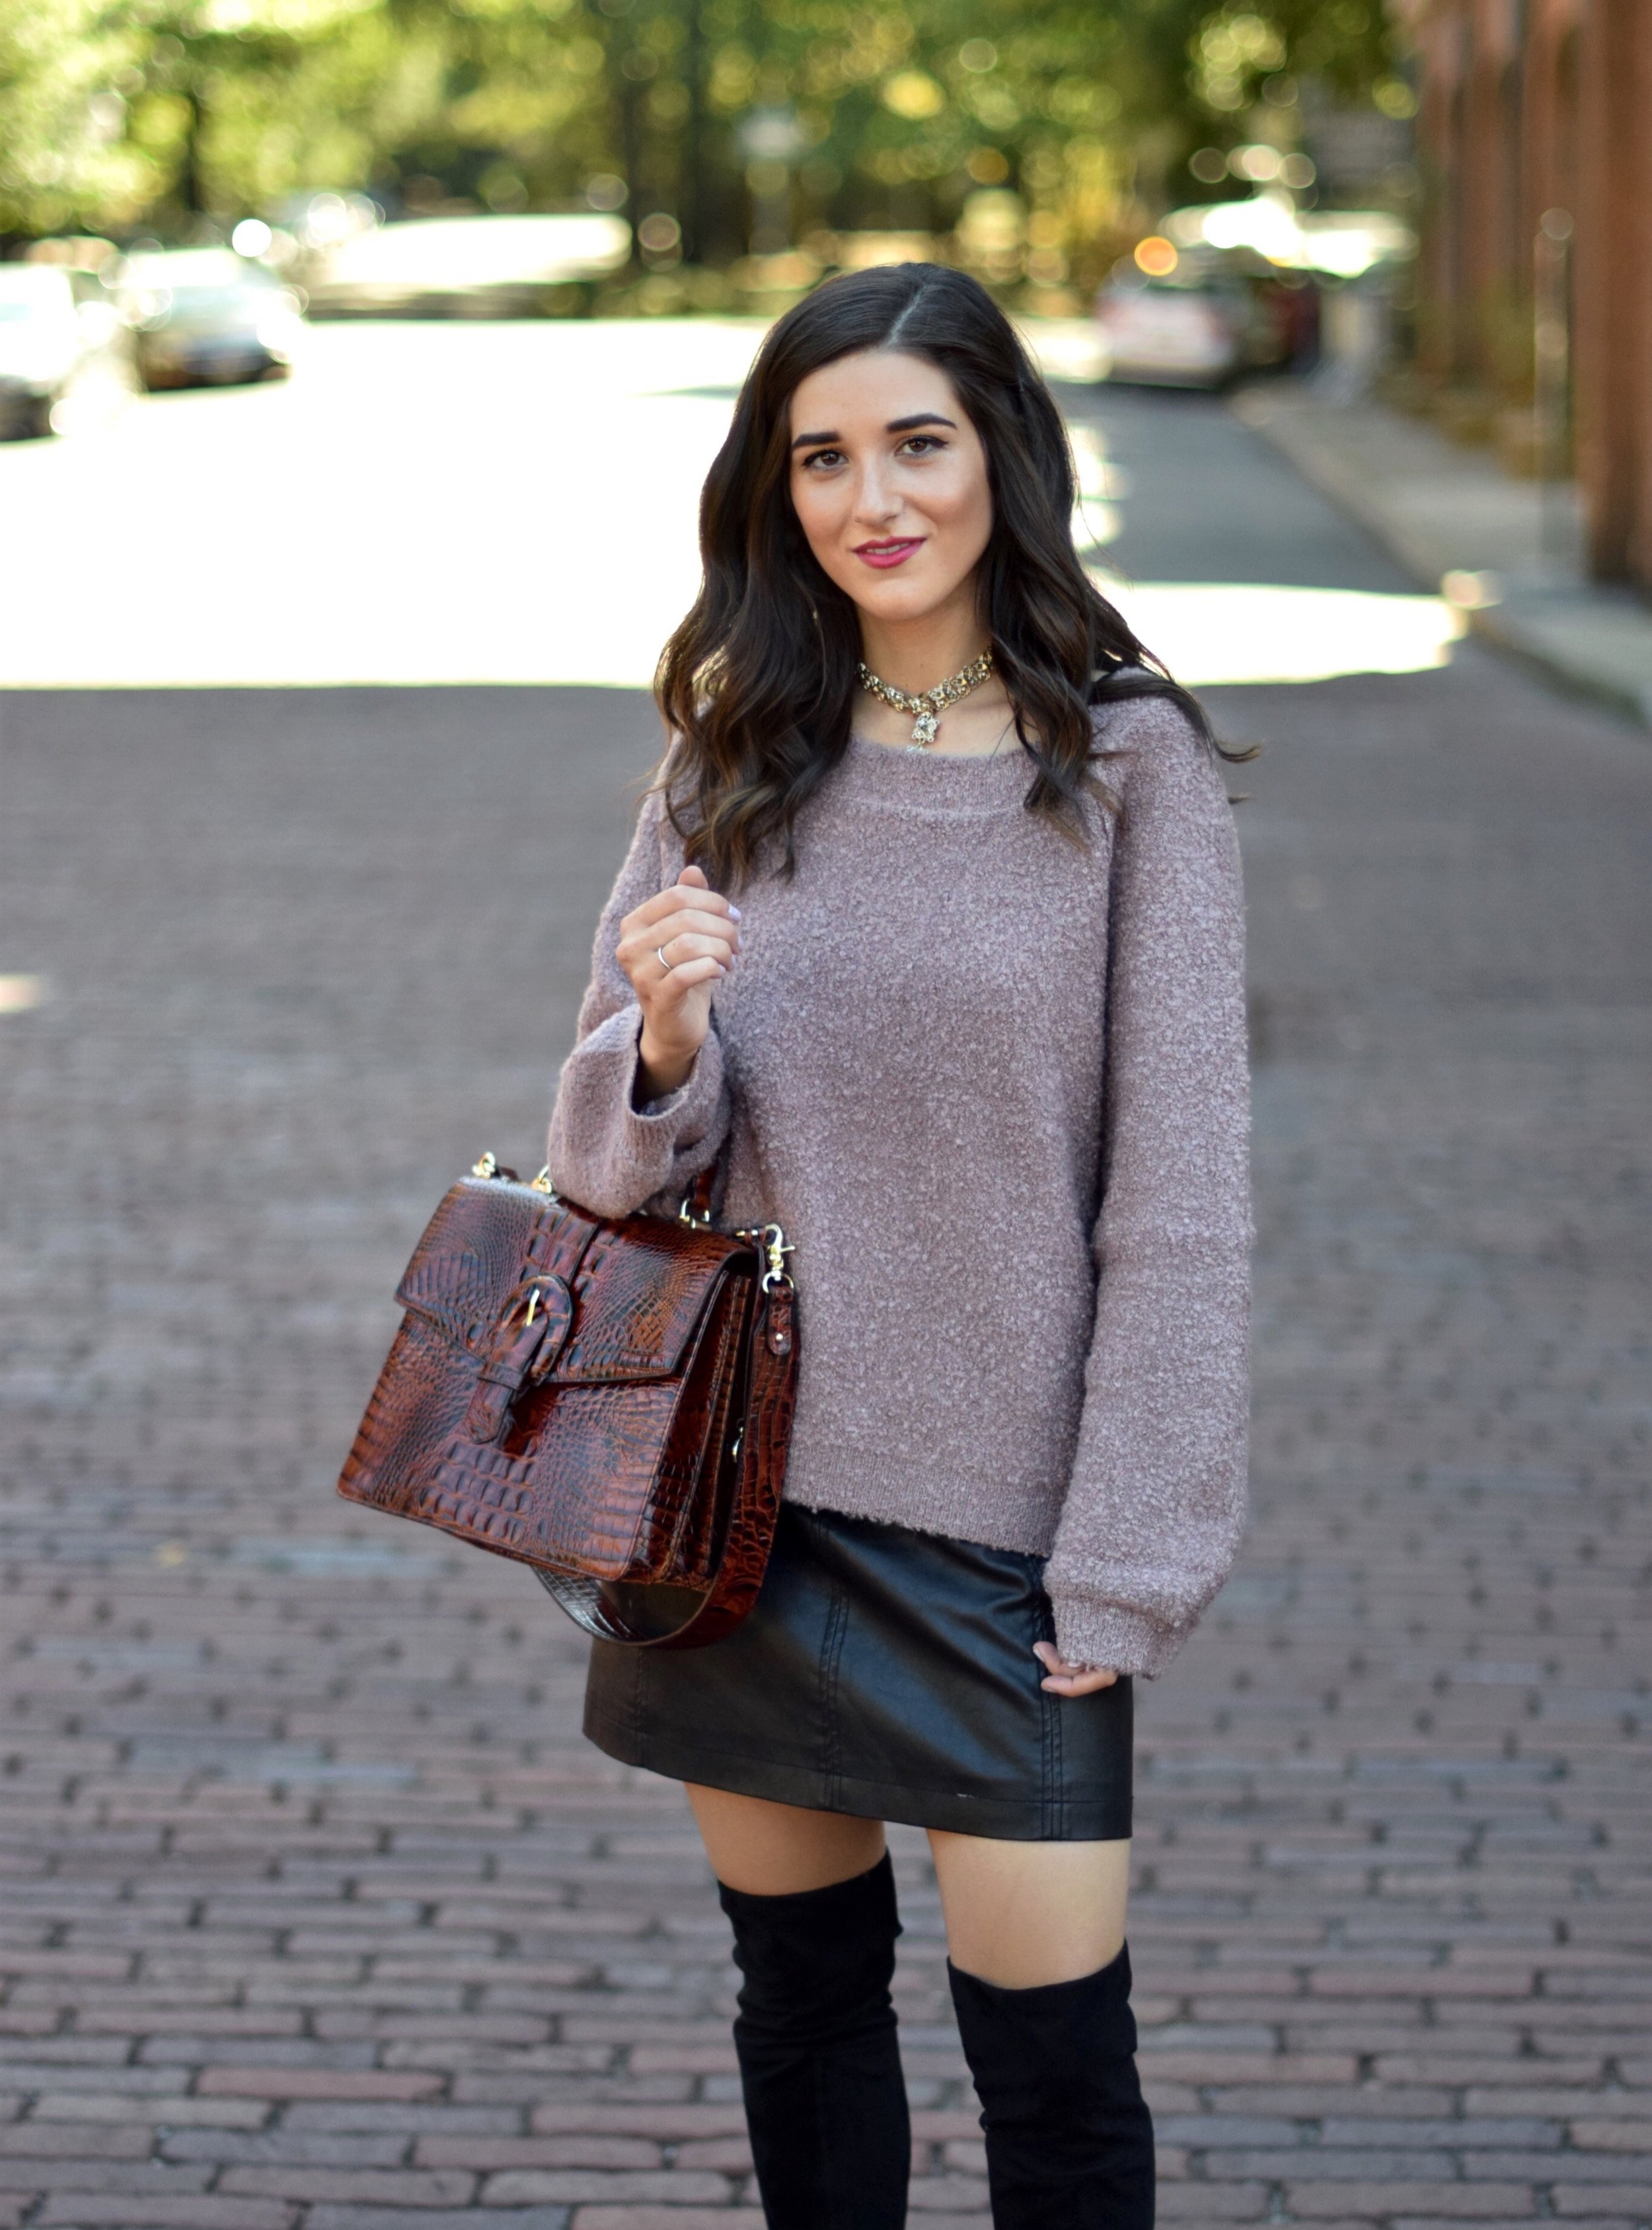 Purple Sweater Black Leather Skirt 8 Tips On Switching Your Blog Name Esther Santer Fashion Blog NYC Street Style Blogger Outfit OOTD Trendy Sunglasses Brahmin Bag Kendra Scott Choker Necklace Girl Women  Urban Outfitters Winter  Look Sale Shopping.jpg